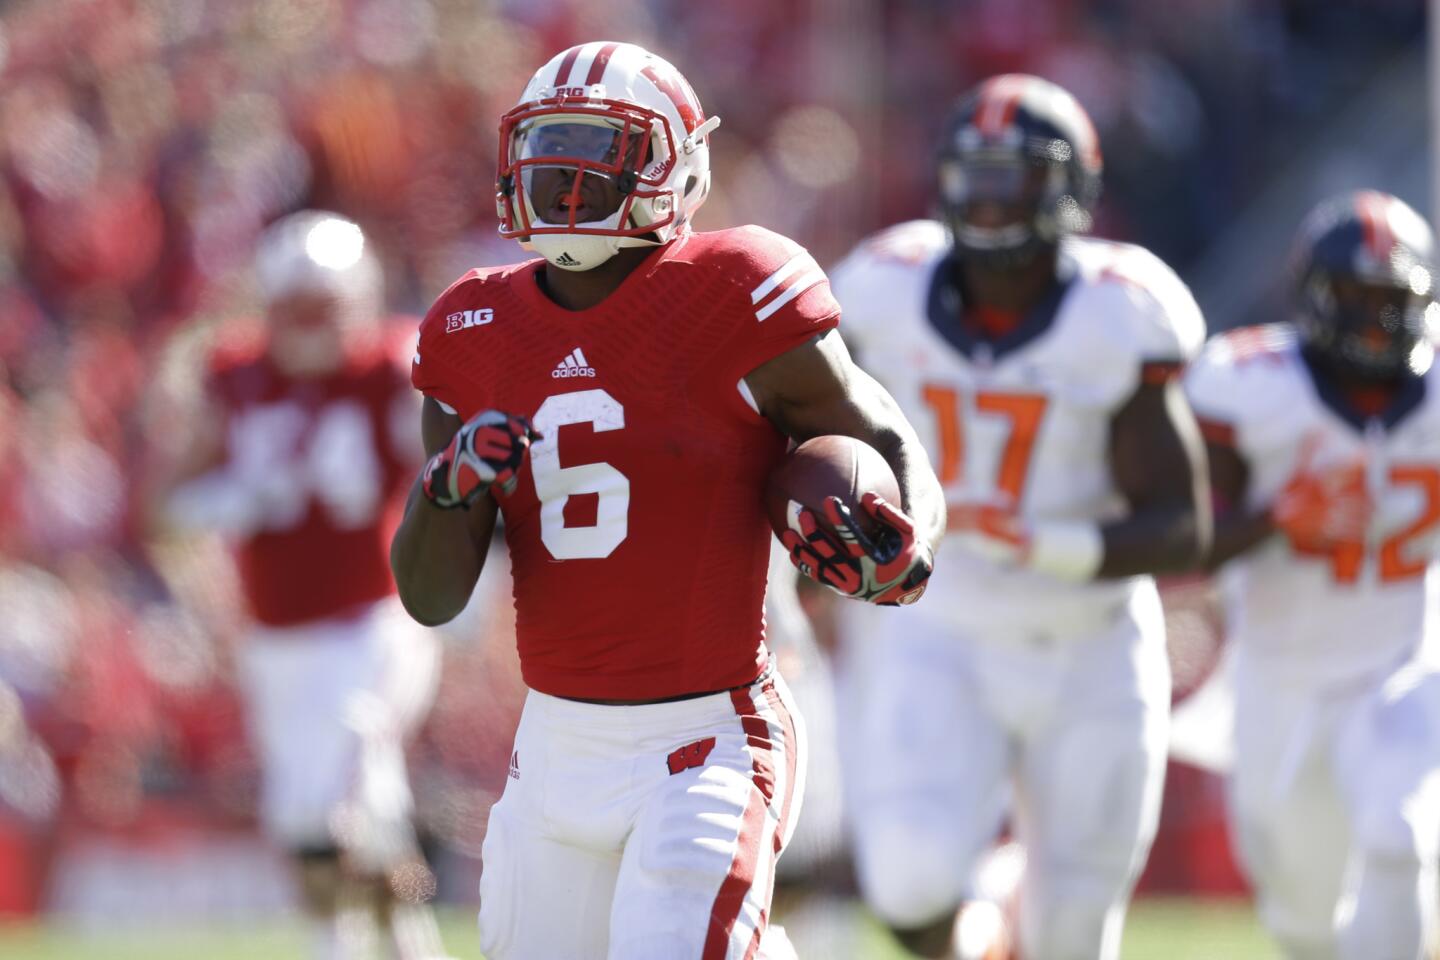 Wisconsin's Corey Clement runs for a touchdown during the second half.